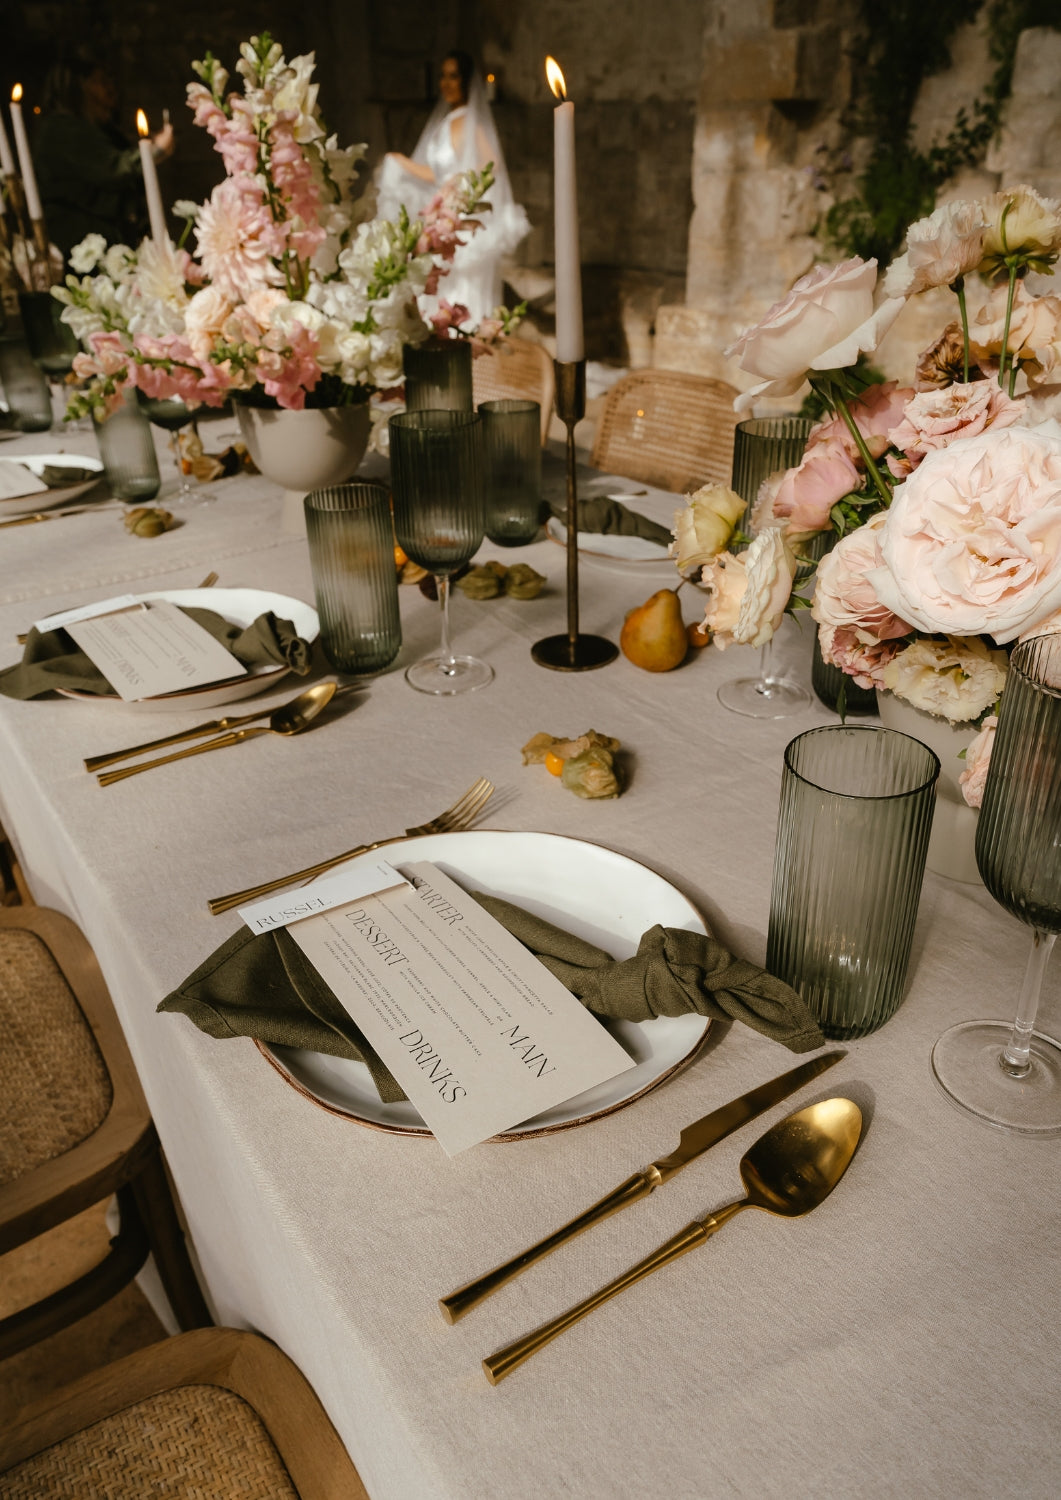 What a Host Home: Modern Wedding tablescape with gold cutlery, round porcelain plates and gold rustic iron candle hodlers